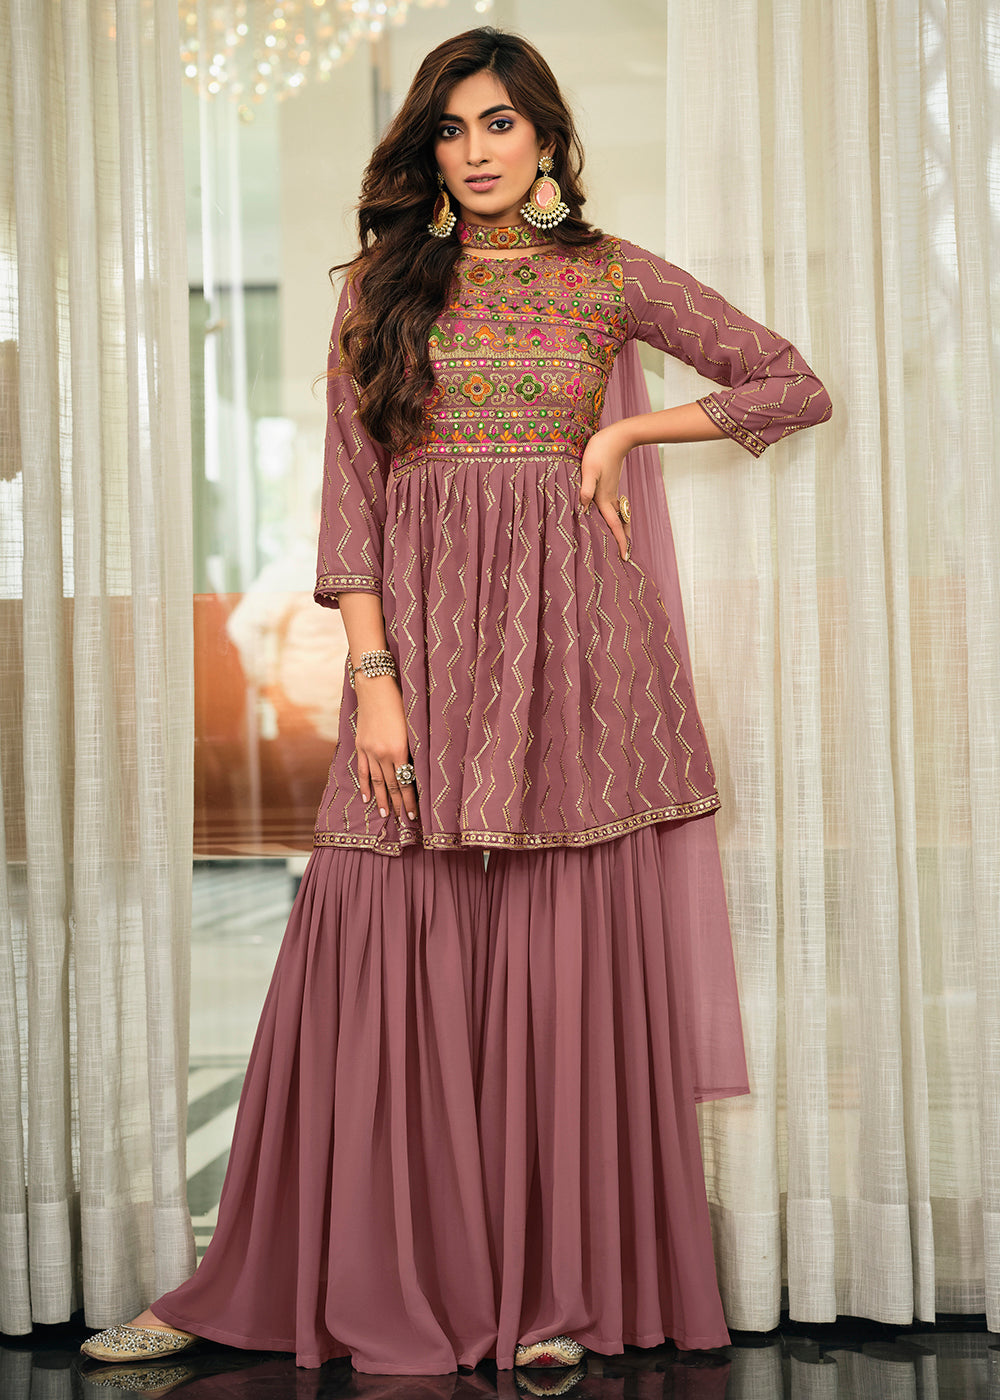 Buy Now Mauve Pink Festive Wear Georgette Salwar Suit Online in USA, UK, Canada, Germany & Worldwide at Empress Clothing.